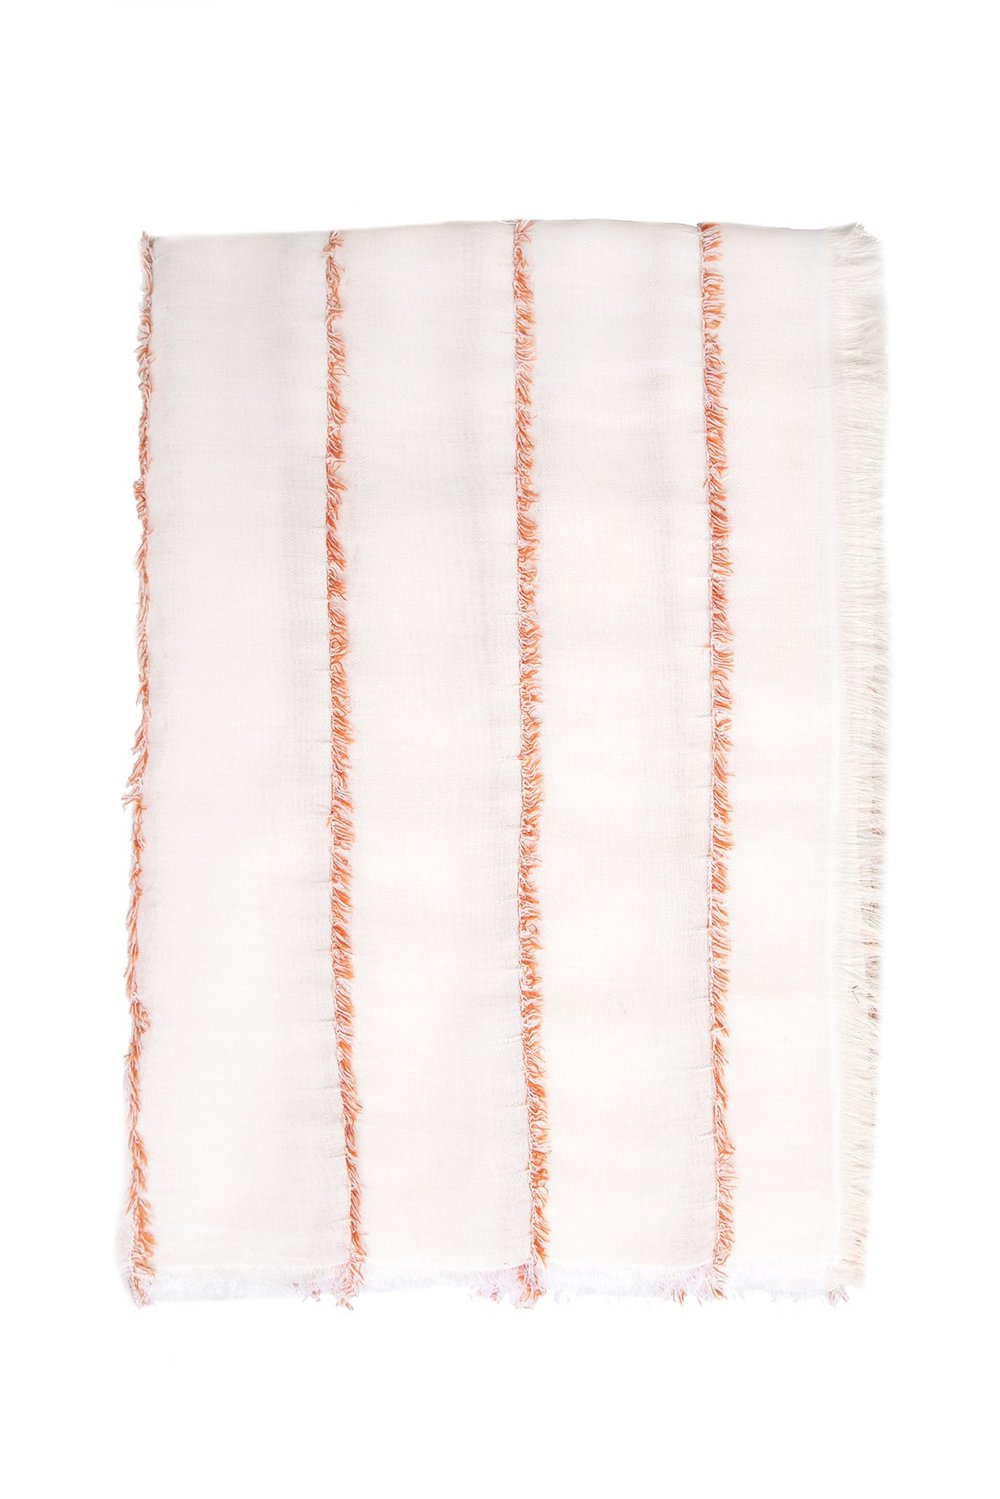 Abstract Scarf Pareo Fringes - Orange